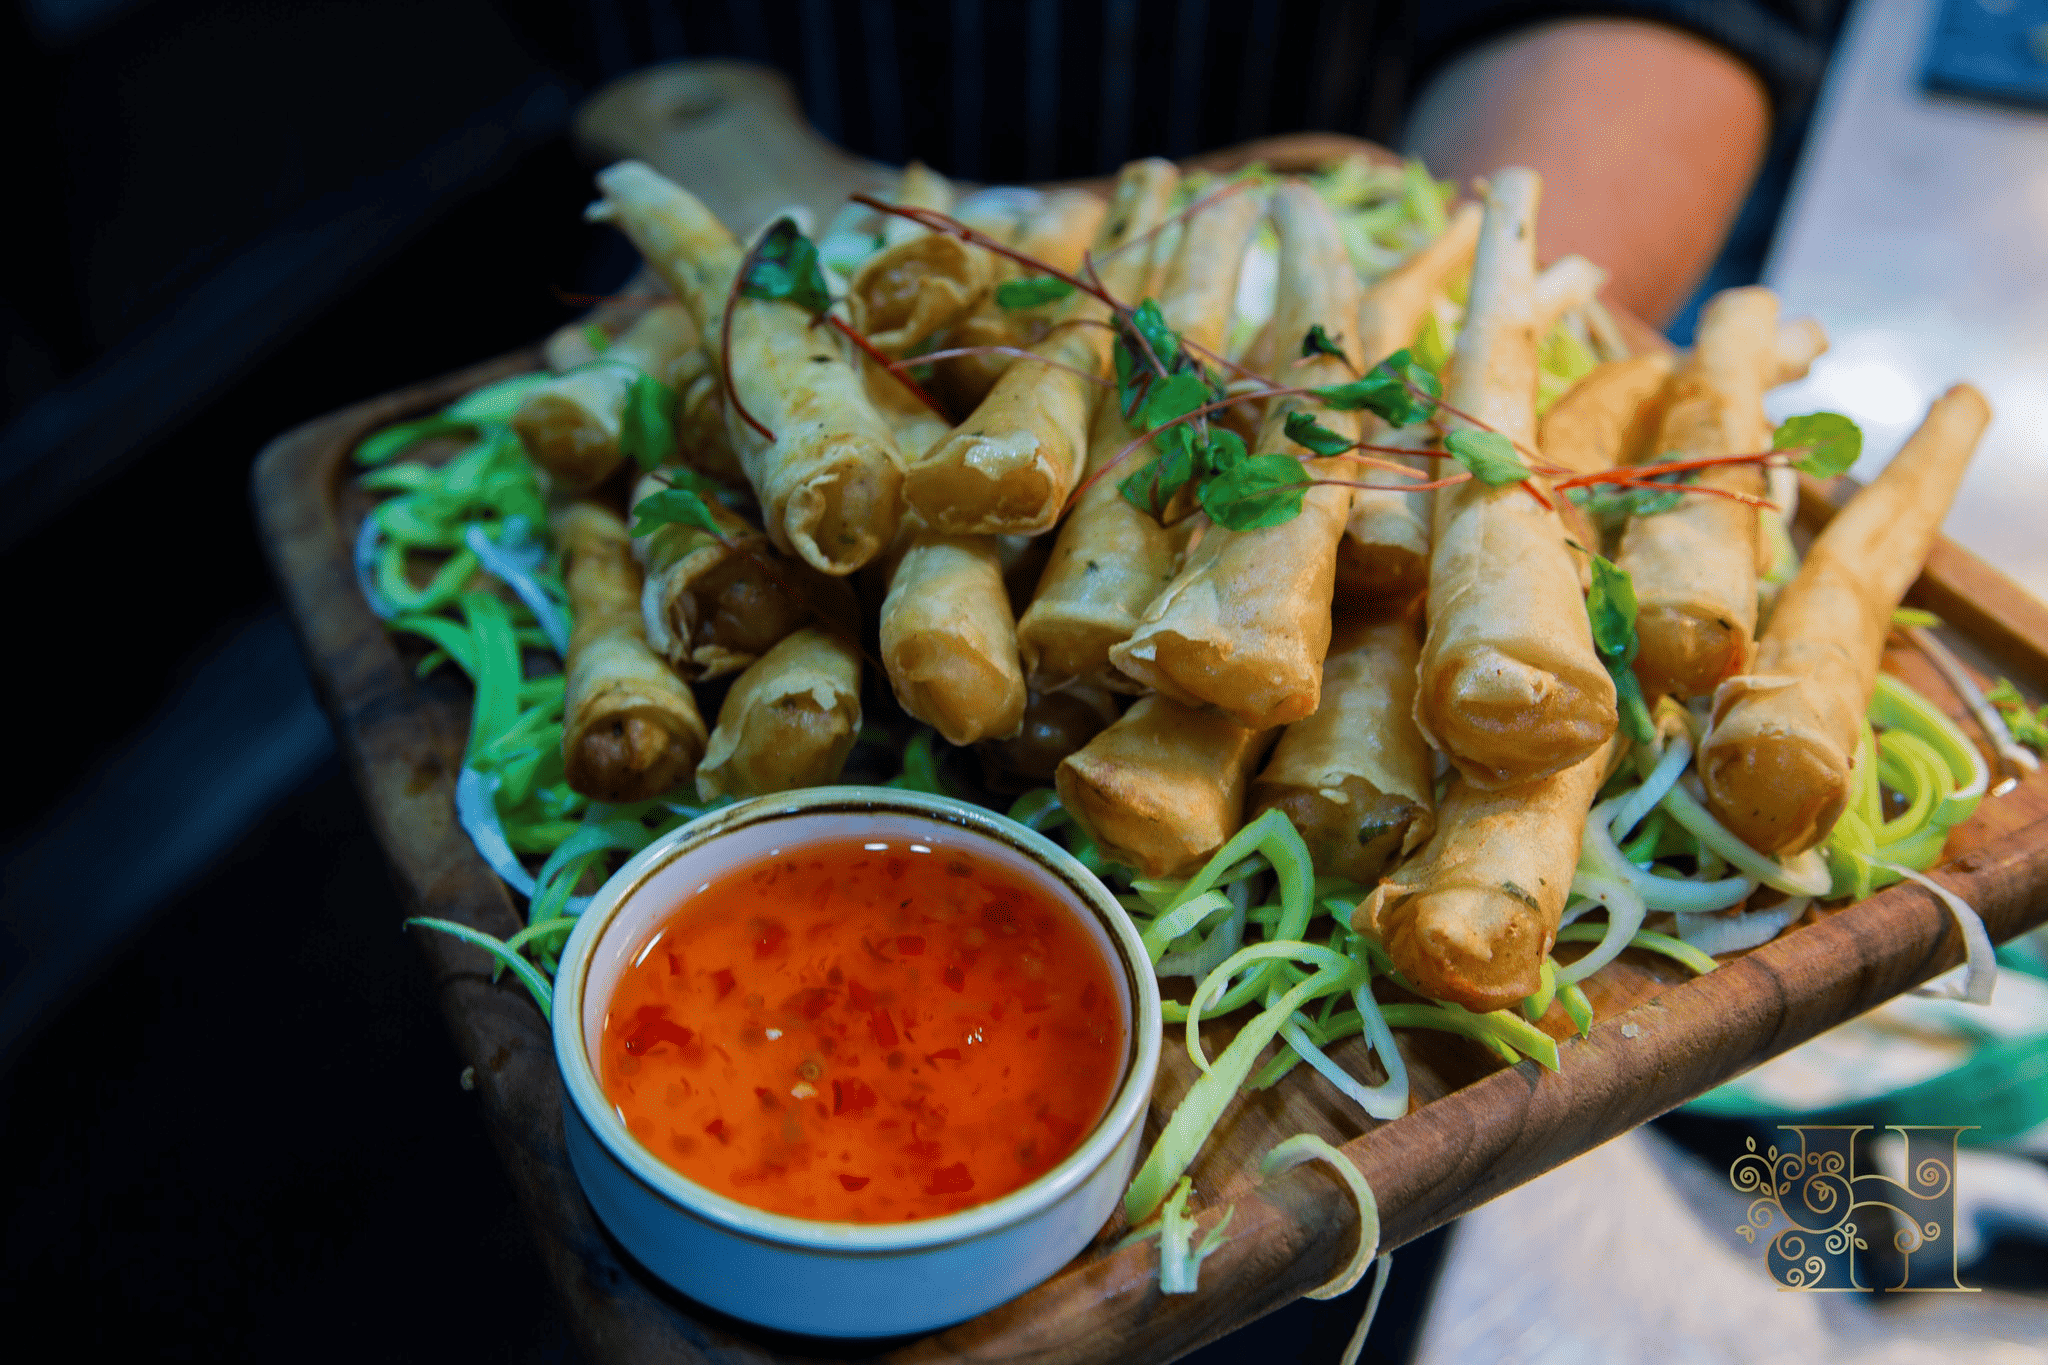 Crispy spring rolls with fresh garnish and tangy dip on a wooden platter at an Indian wedding event.